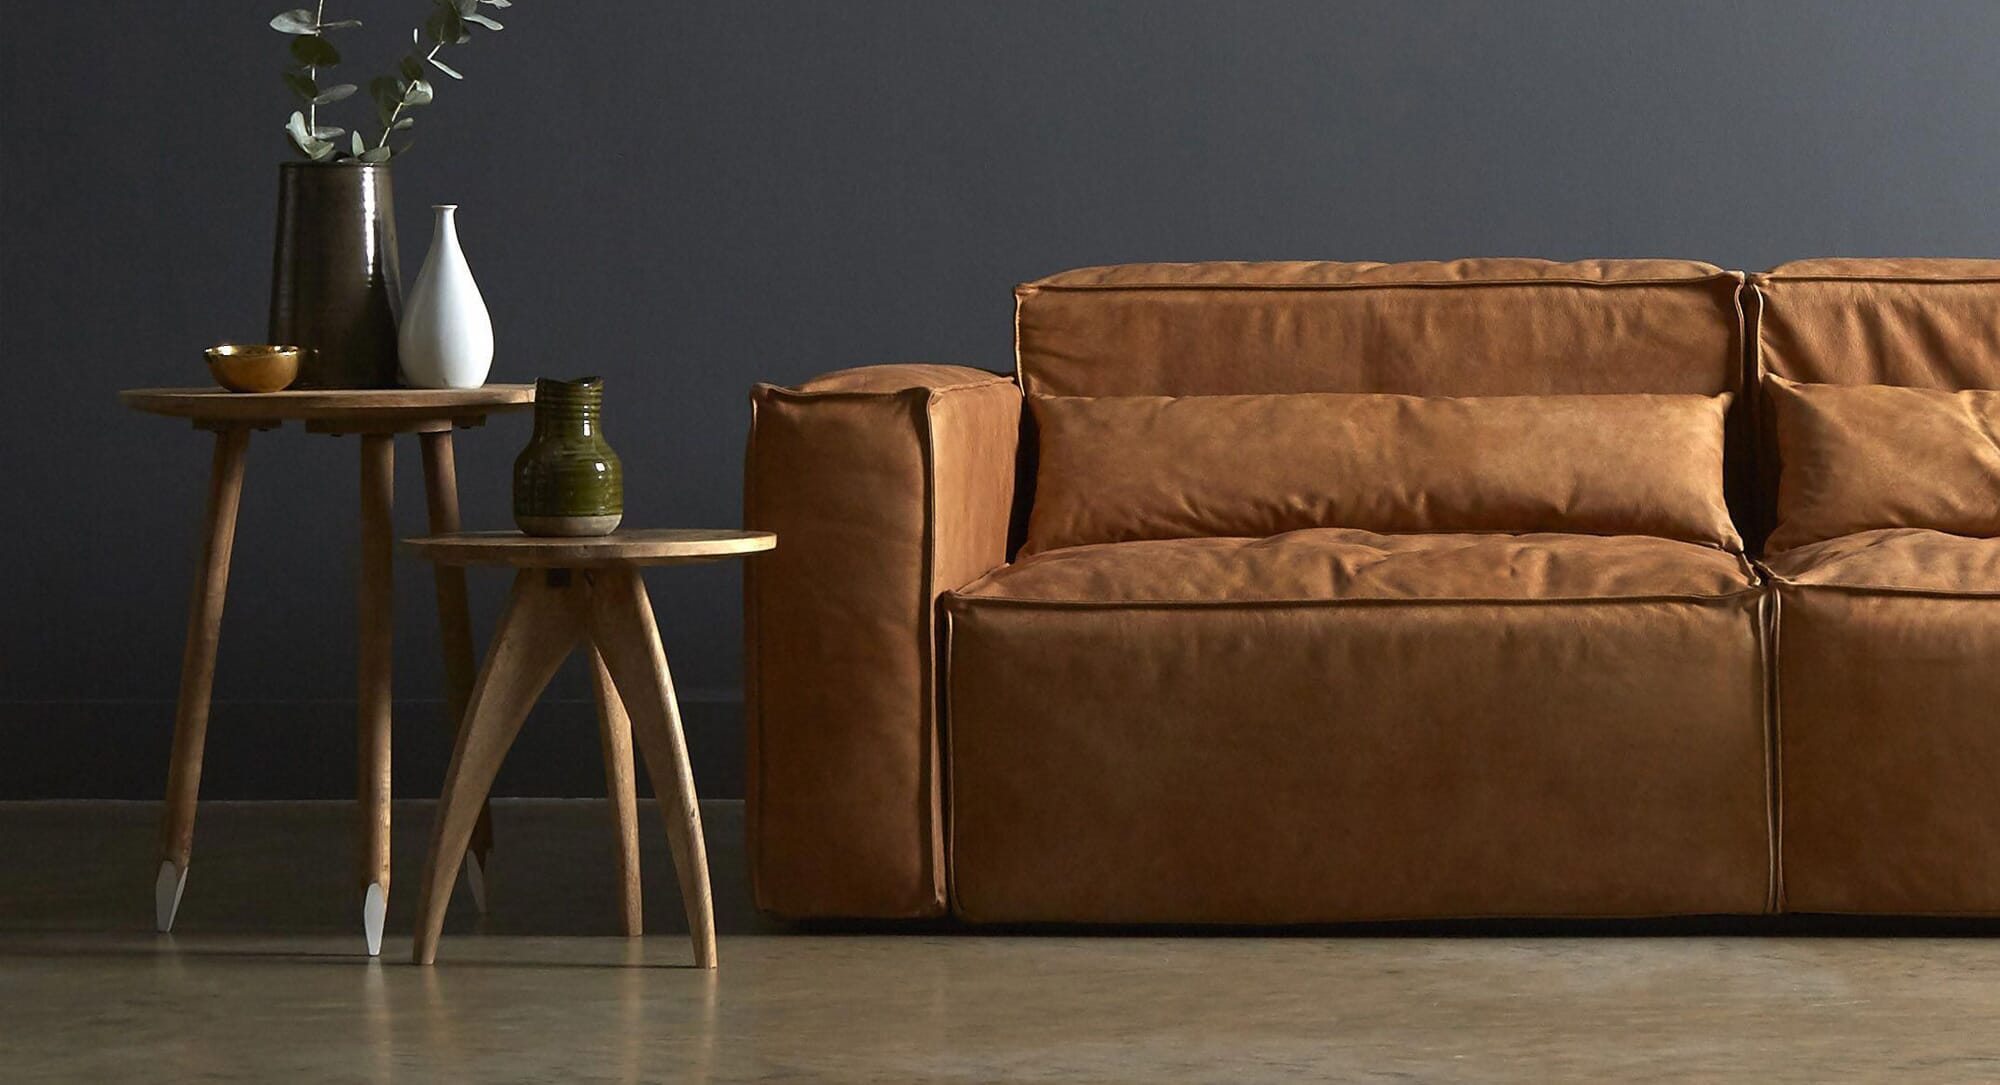 Swoon introduces Speedy Designs: Furniture delivered faster | OPUMO ...